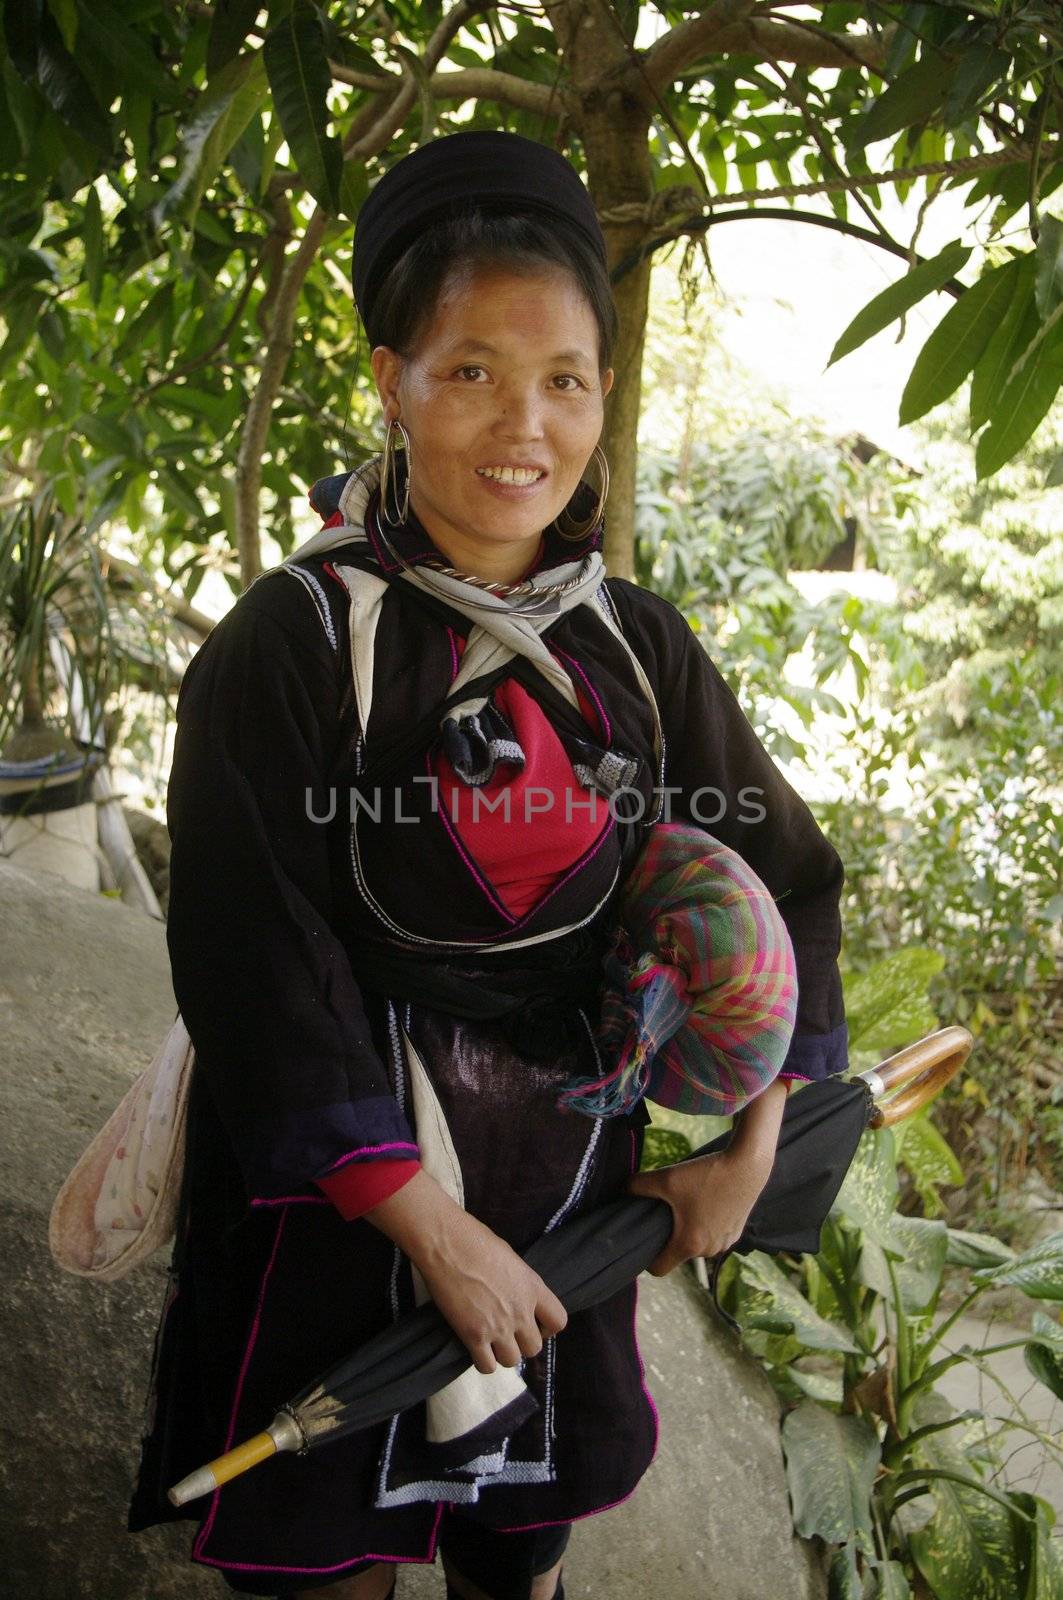 The woman of the Dao ethnic group have retained their dress black ancestry. While men often left their clothes women wear their traditional dress in the same field work